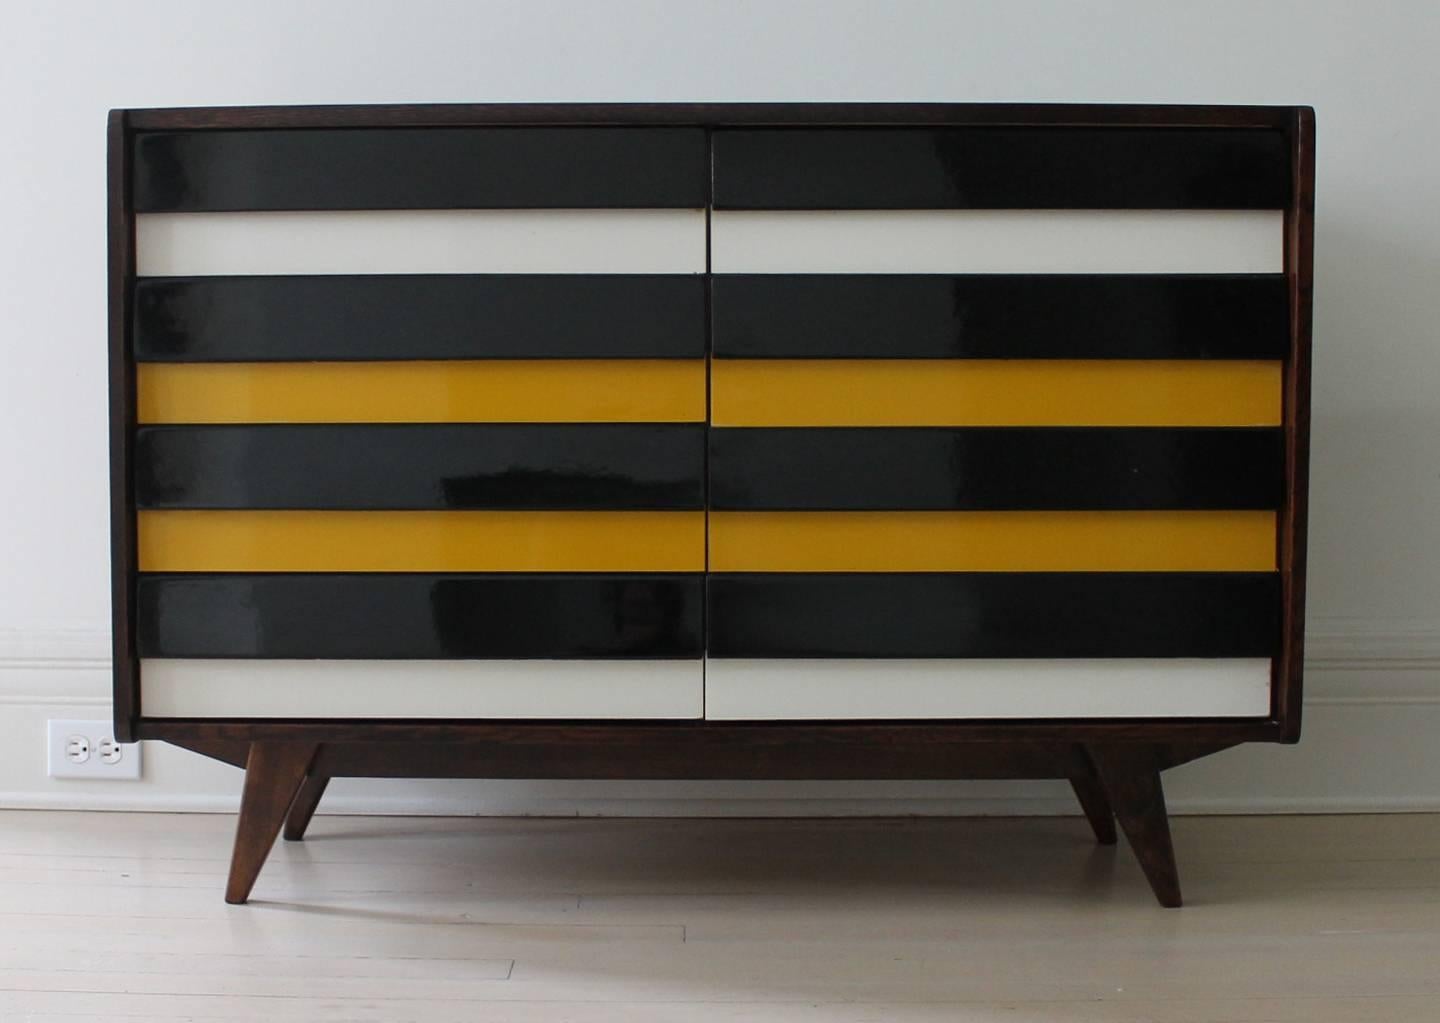 Walnut chest of drawers designed by Jiri Jirontek for: Interier Praha. 
Walnut structure, high gloss black, white and yellow painted wood drawers. 
Four drawers on each side.